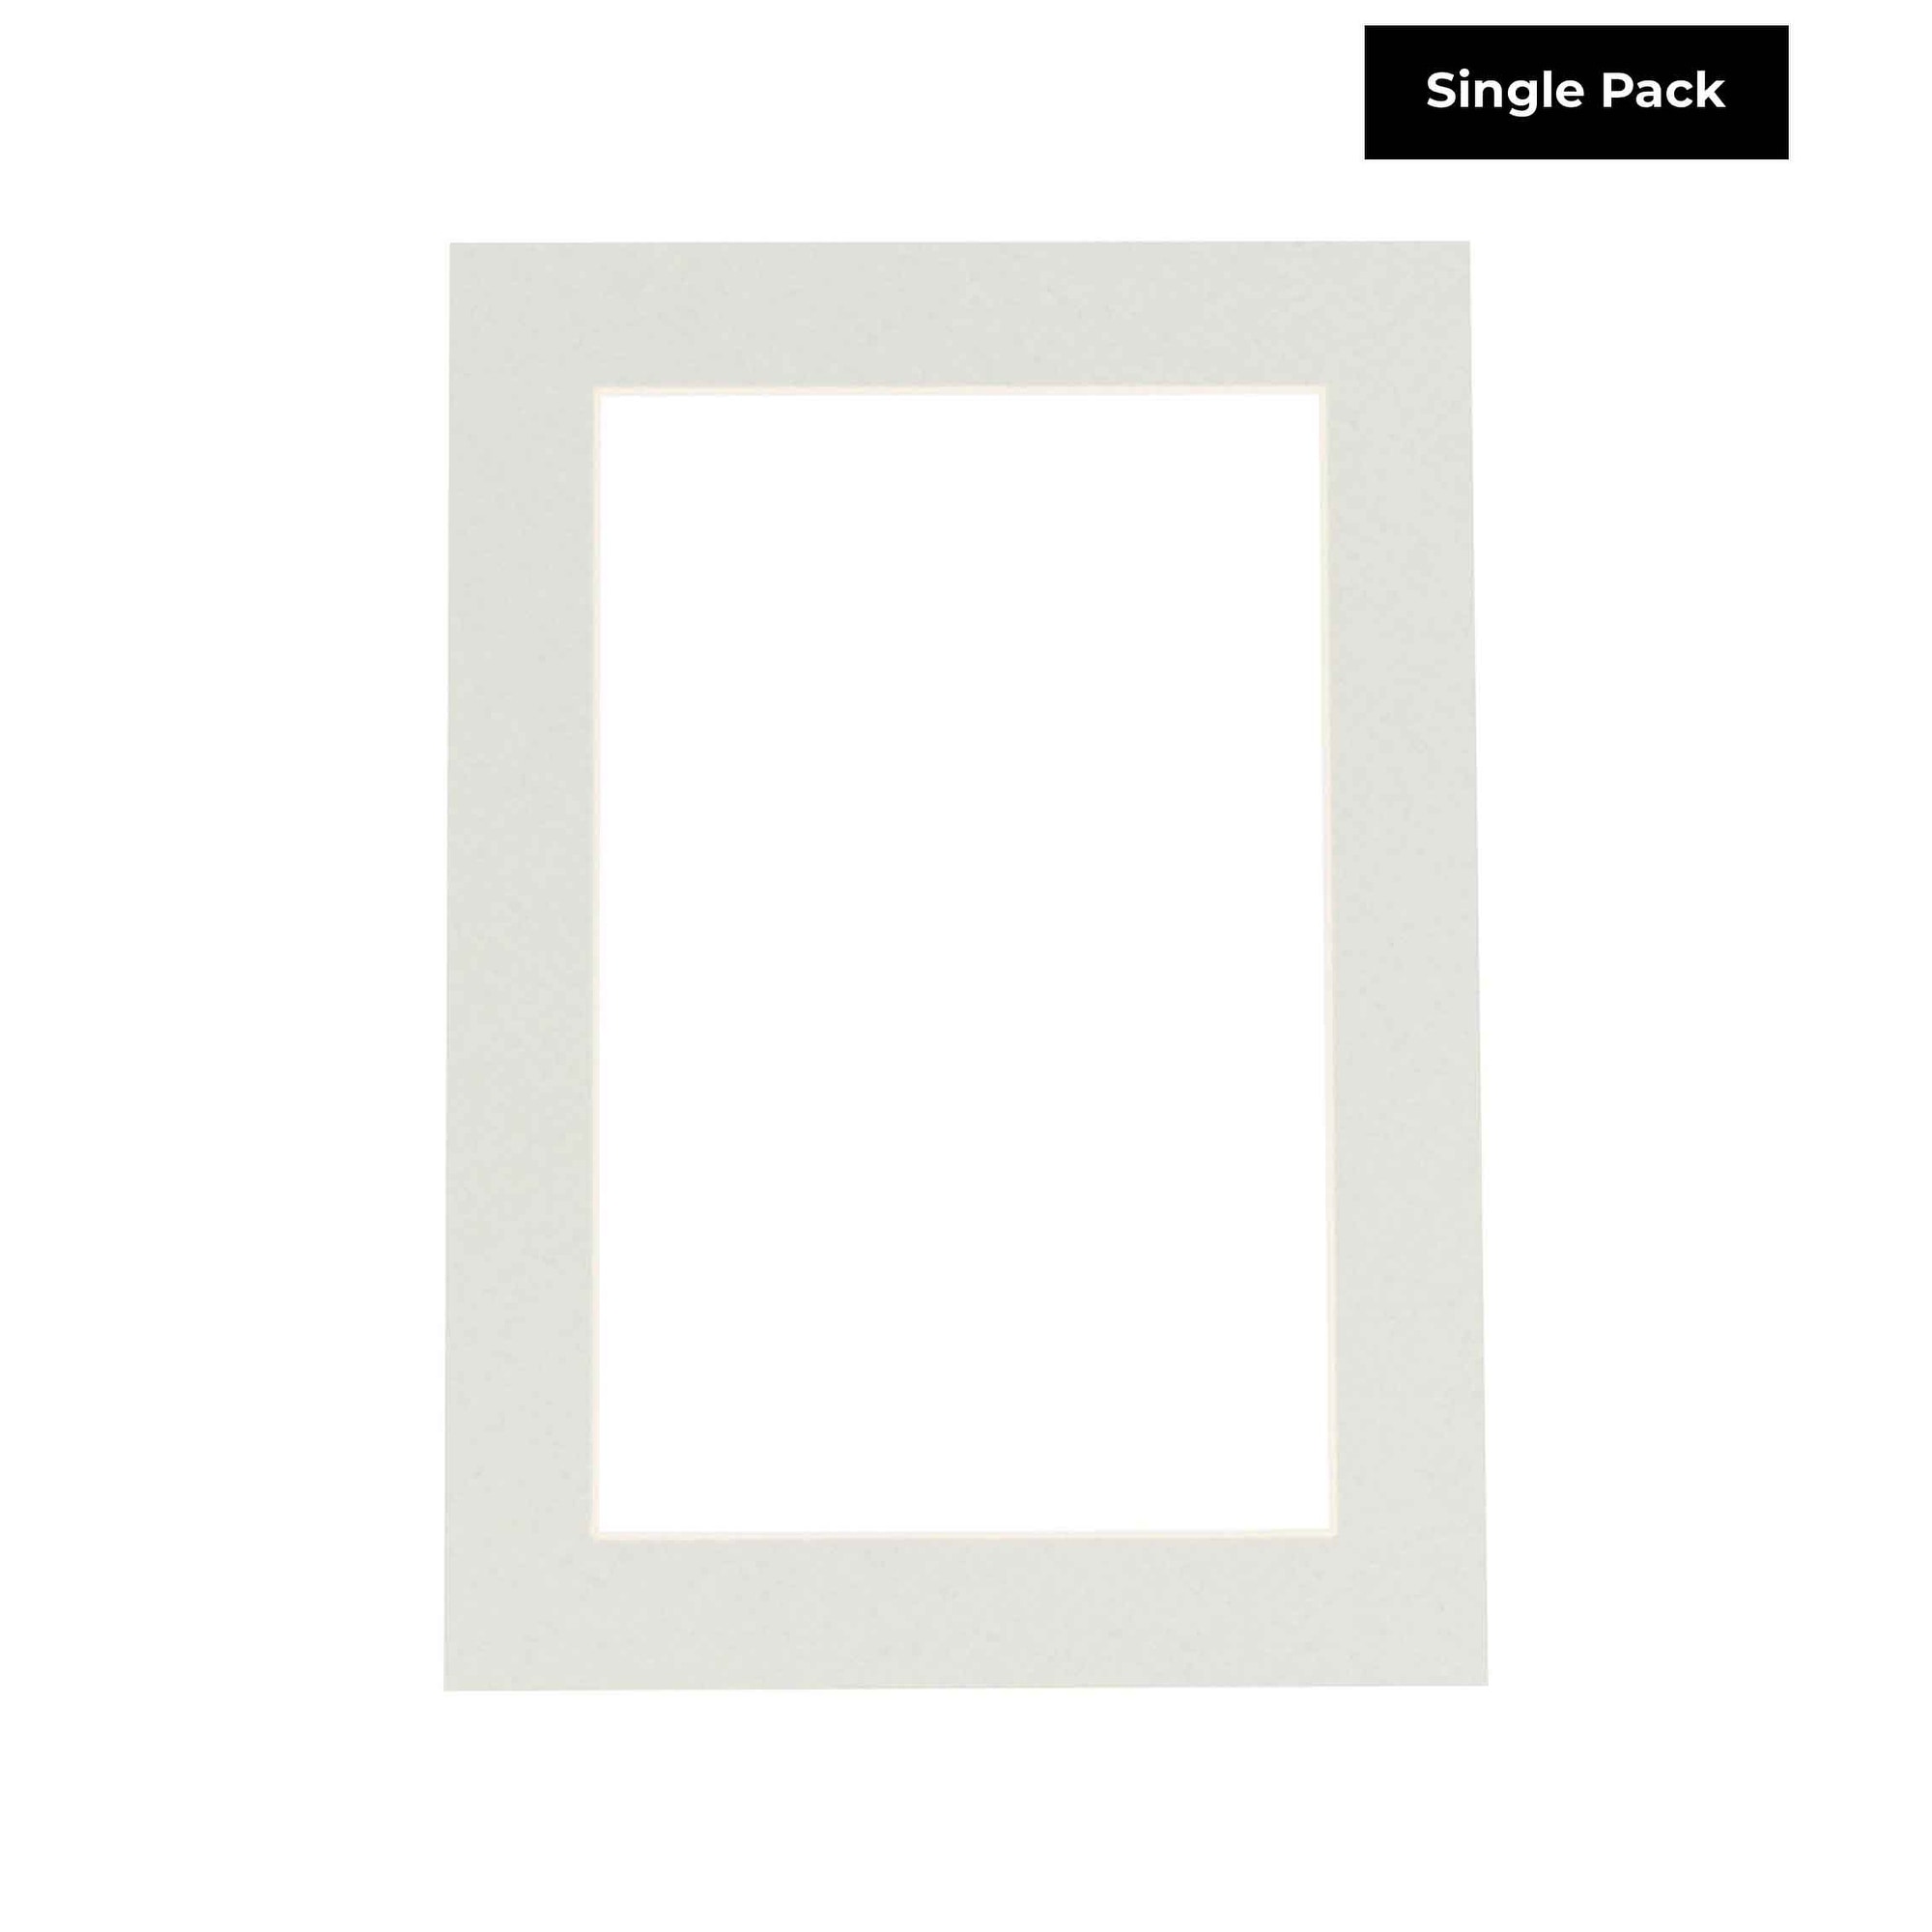 18x24 Mat Bevel Cut for 15x20 Photos - Acid Free White Precut Matboard - for Pictures, Photos, Framing